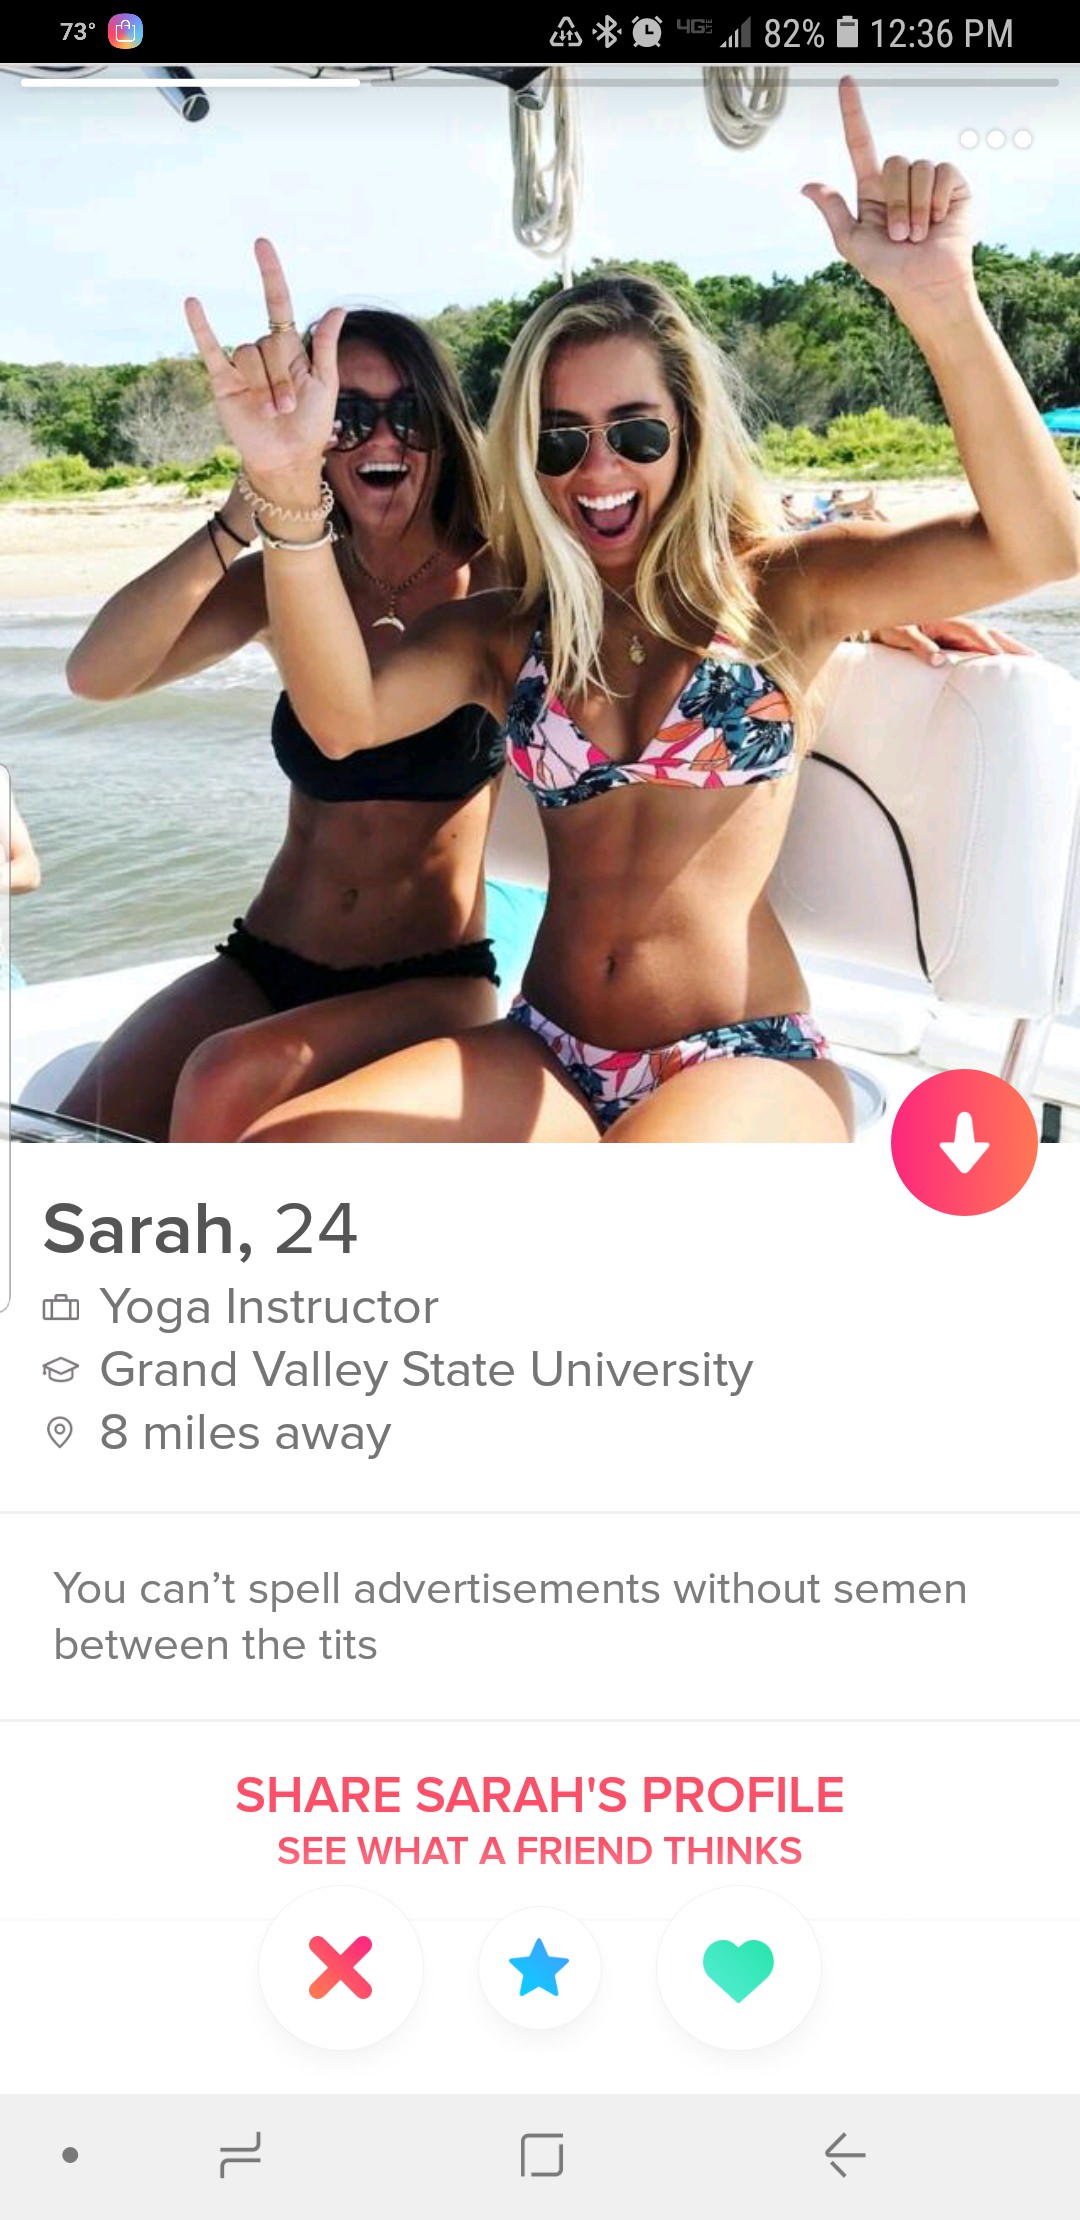 tinder - naked tinder profiles - 73 Lc D 4G 82% Sarah, 24 Yoga Instructor @ Grand Valley State University 8 miles away You can't spell advertisements without semen between the tits Sarah'S Profile See What A Friend Thinks